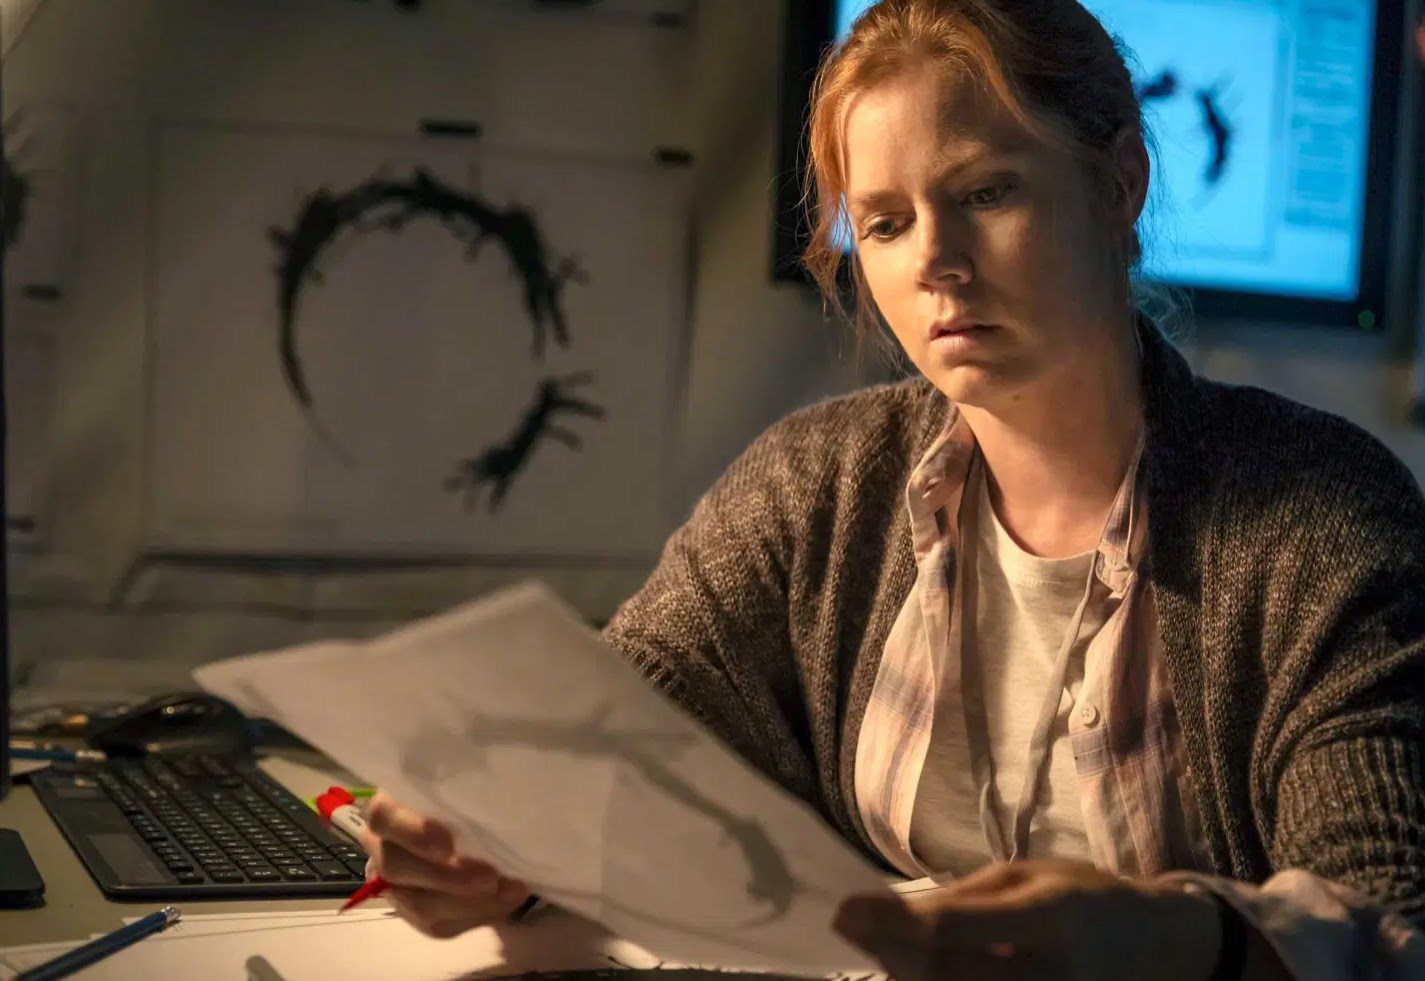 Arrival with Amy Adams